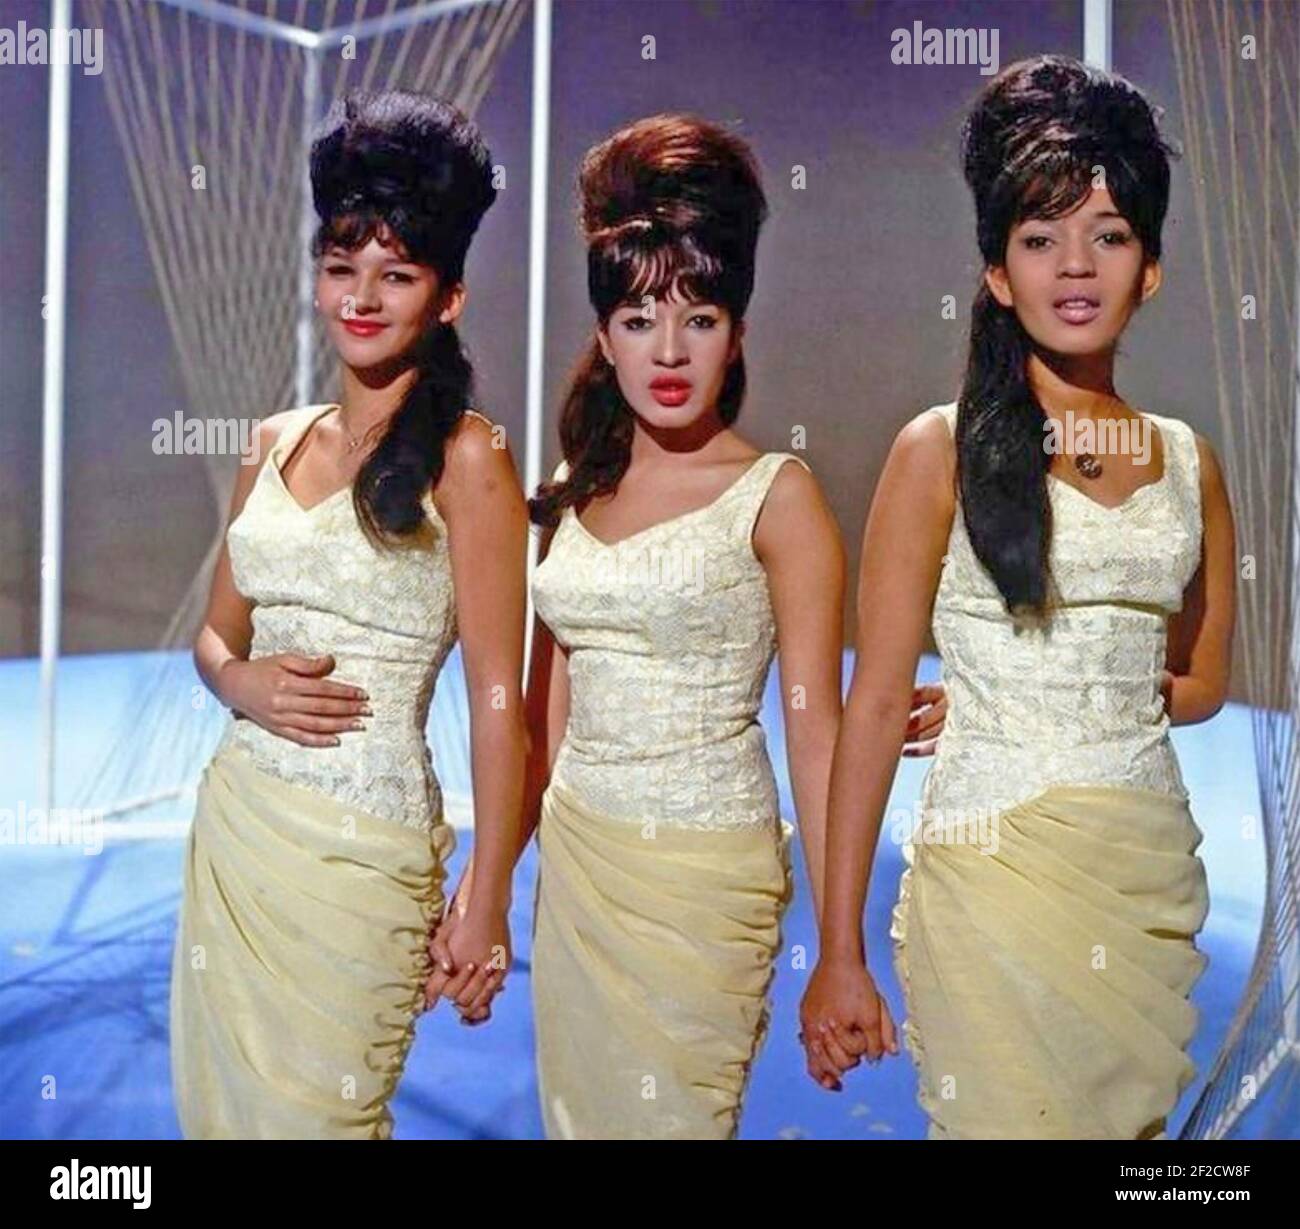 THE RONETTES Promotional photo of American vocal trio about 1967. From left: Nedra Talley, Ronnie Spector, Estelle Bennett. Stock Photo